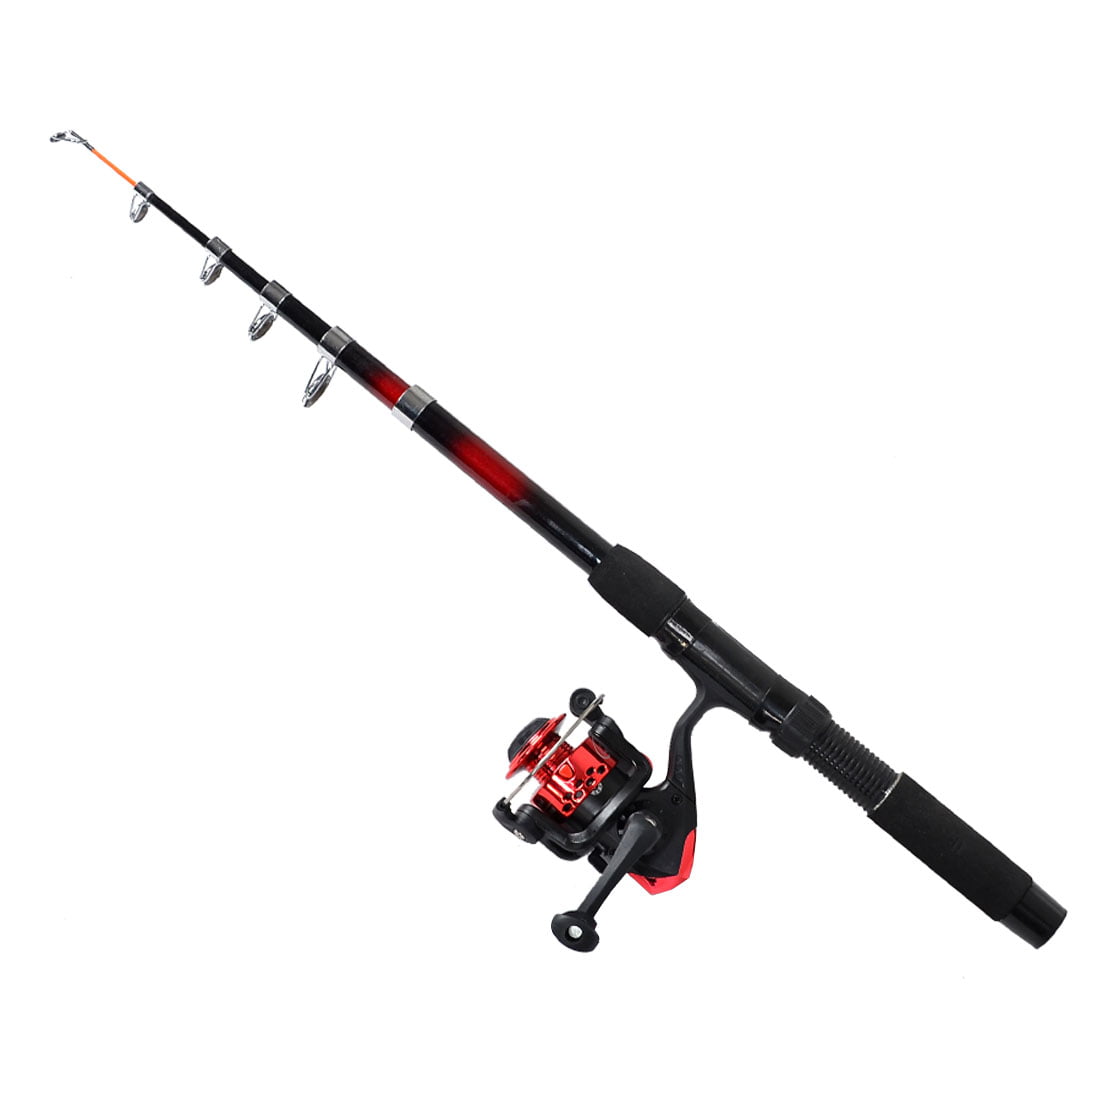 Retractable Fishing Rod 2M w Gear Ratio 5.21 Spinning